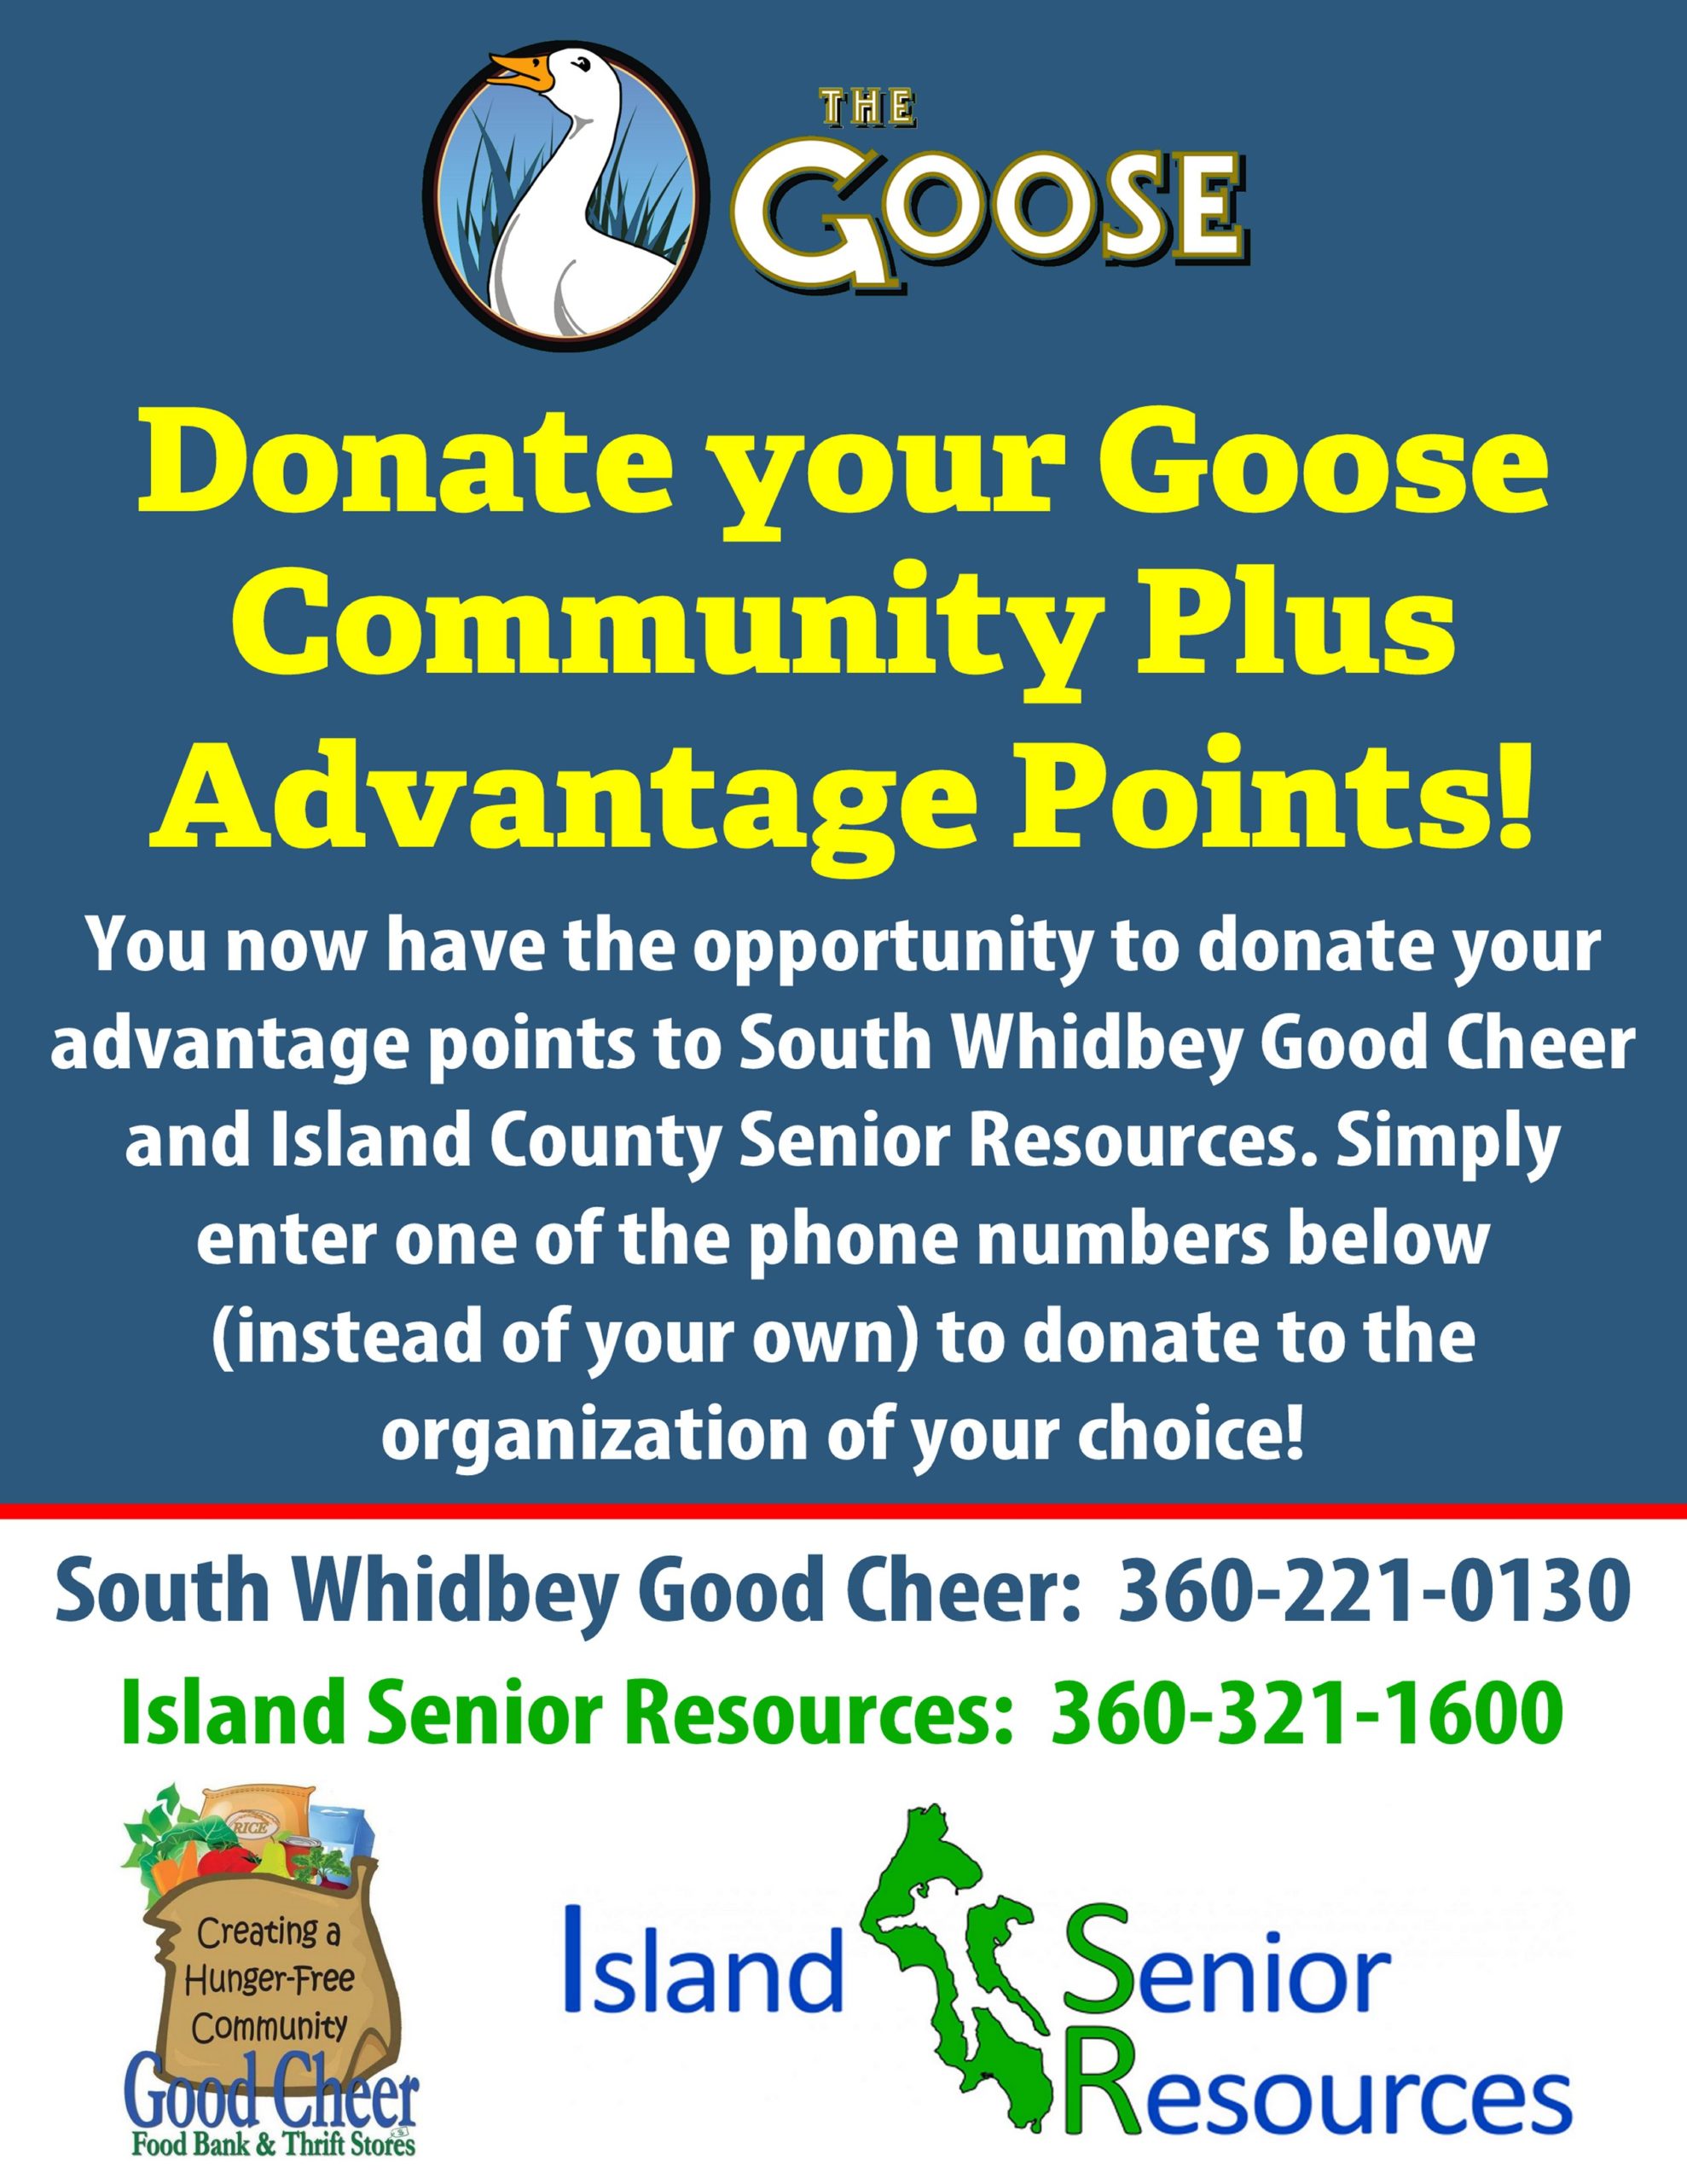 Shop at the Goose and help Island Senior Resources too